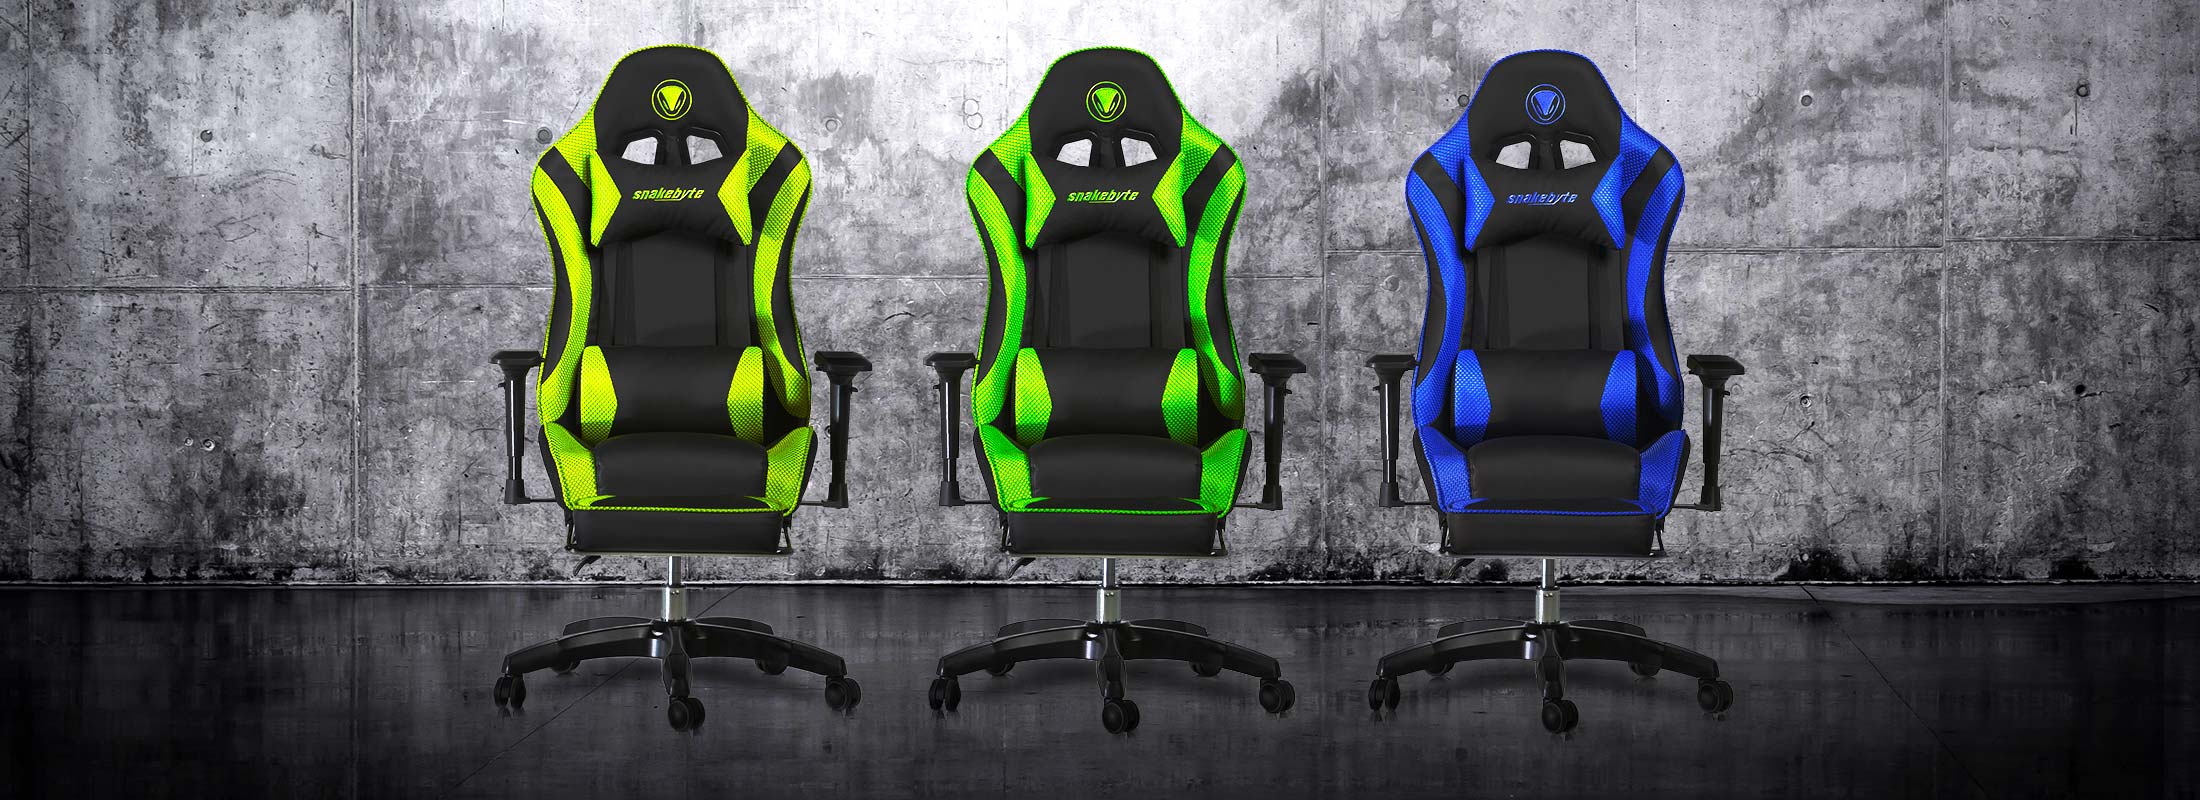 Snakebyte Gaming:Seat Review – Happy Cheeks